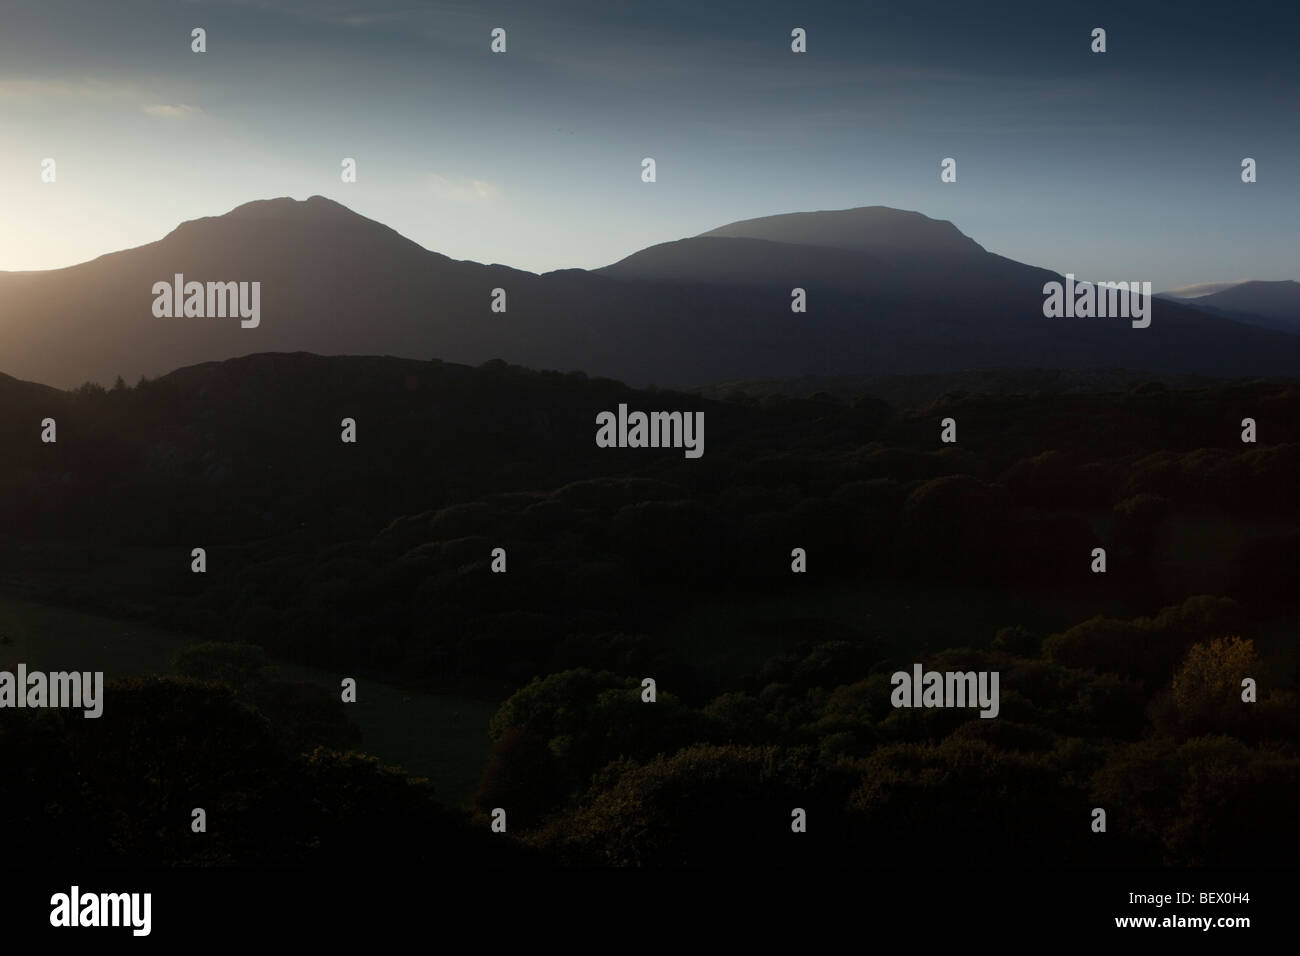 Snowdonia North Wales United Kingdom at Dusk showing mountains and sky in Abstract Stock Photo